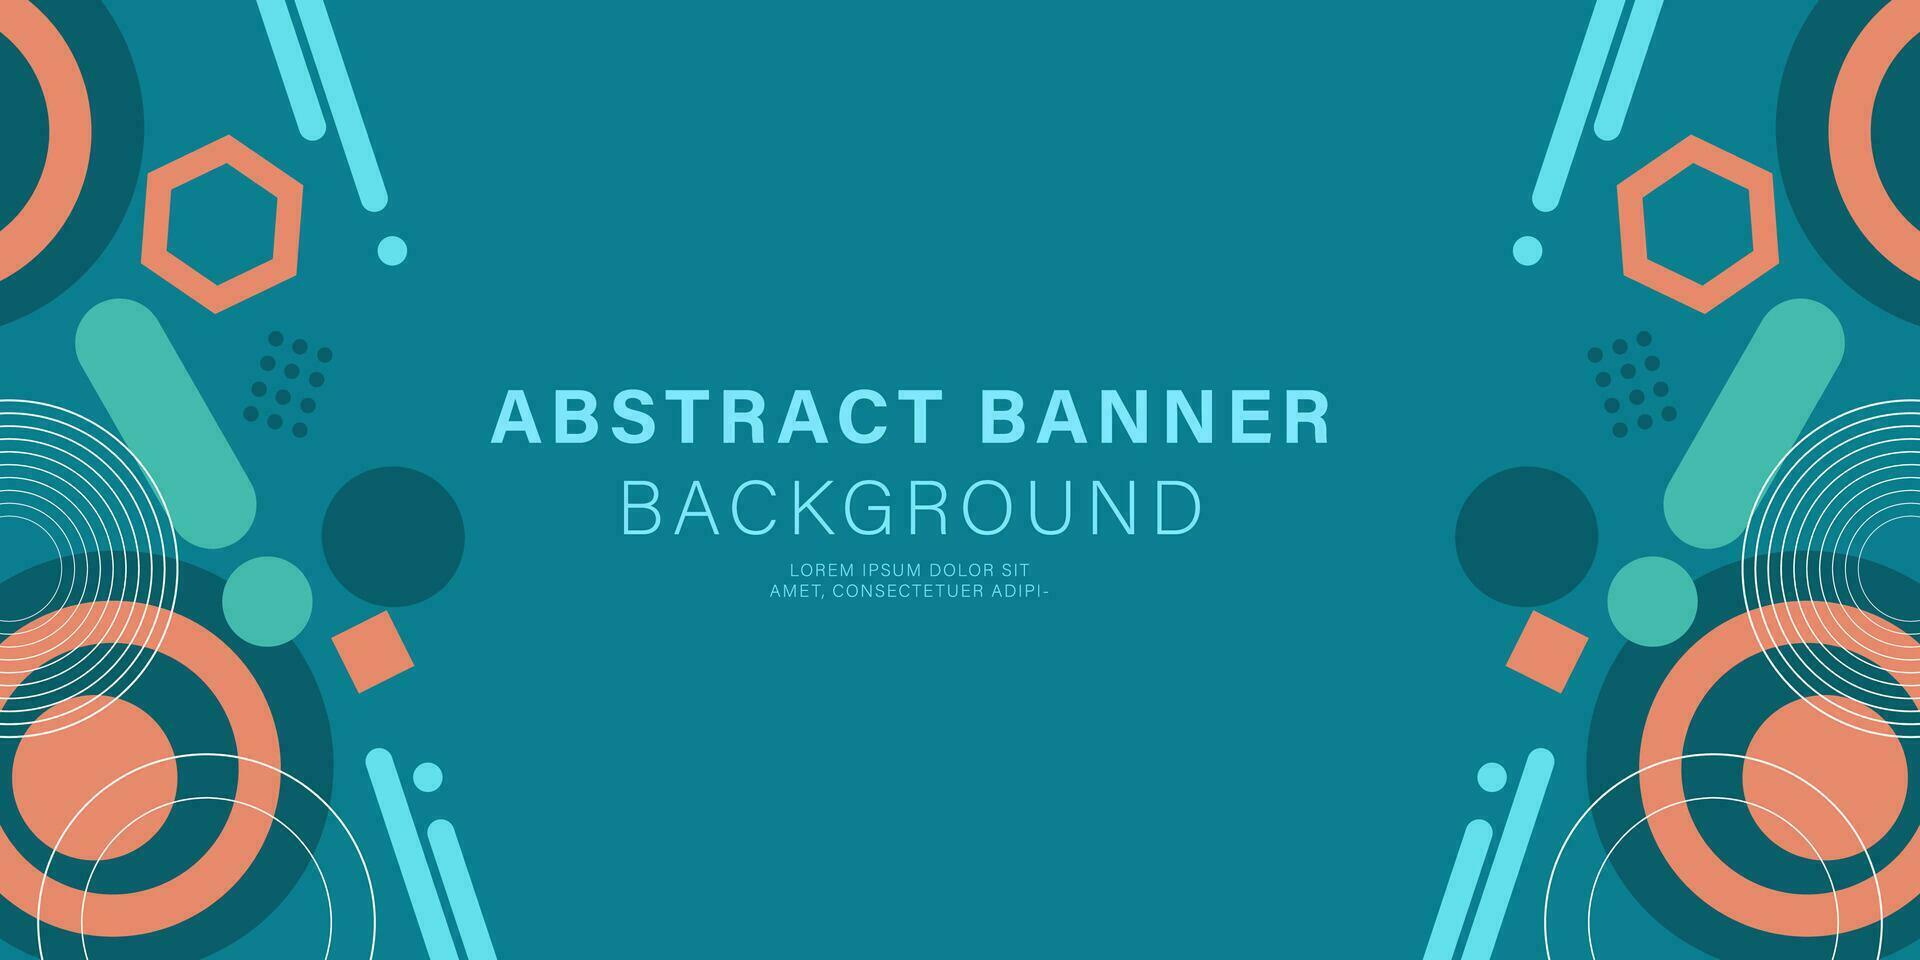 Banner background abstract style poster backdrop templates vector graphic design